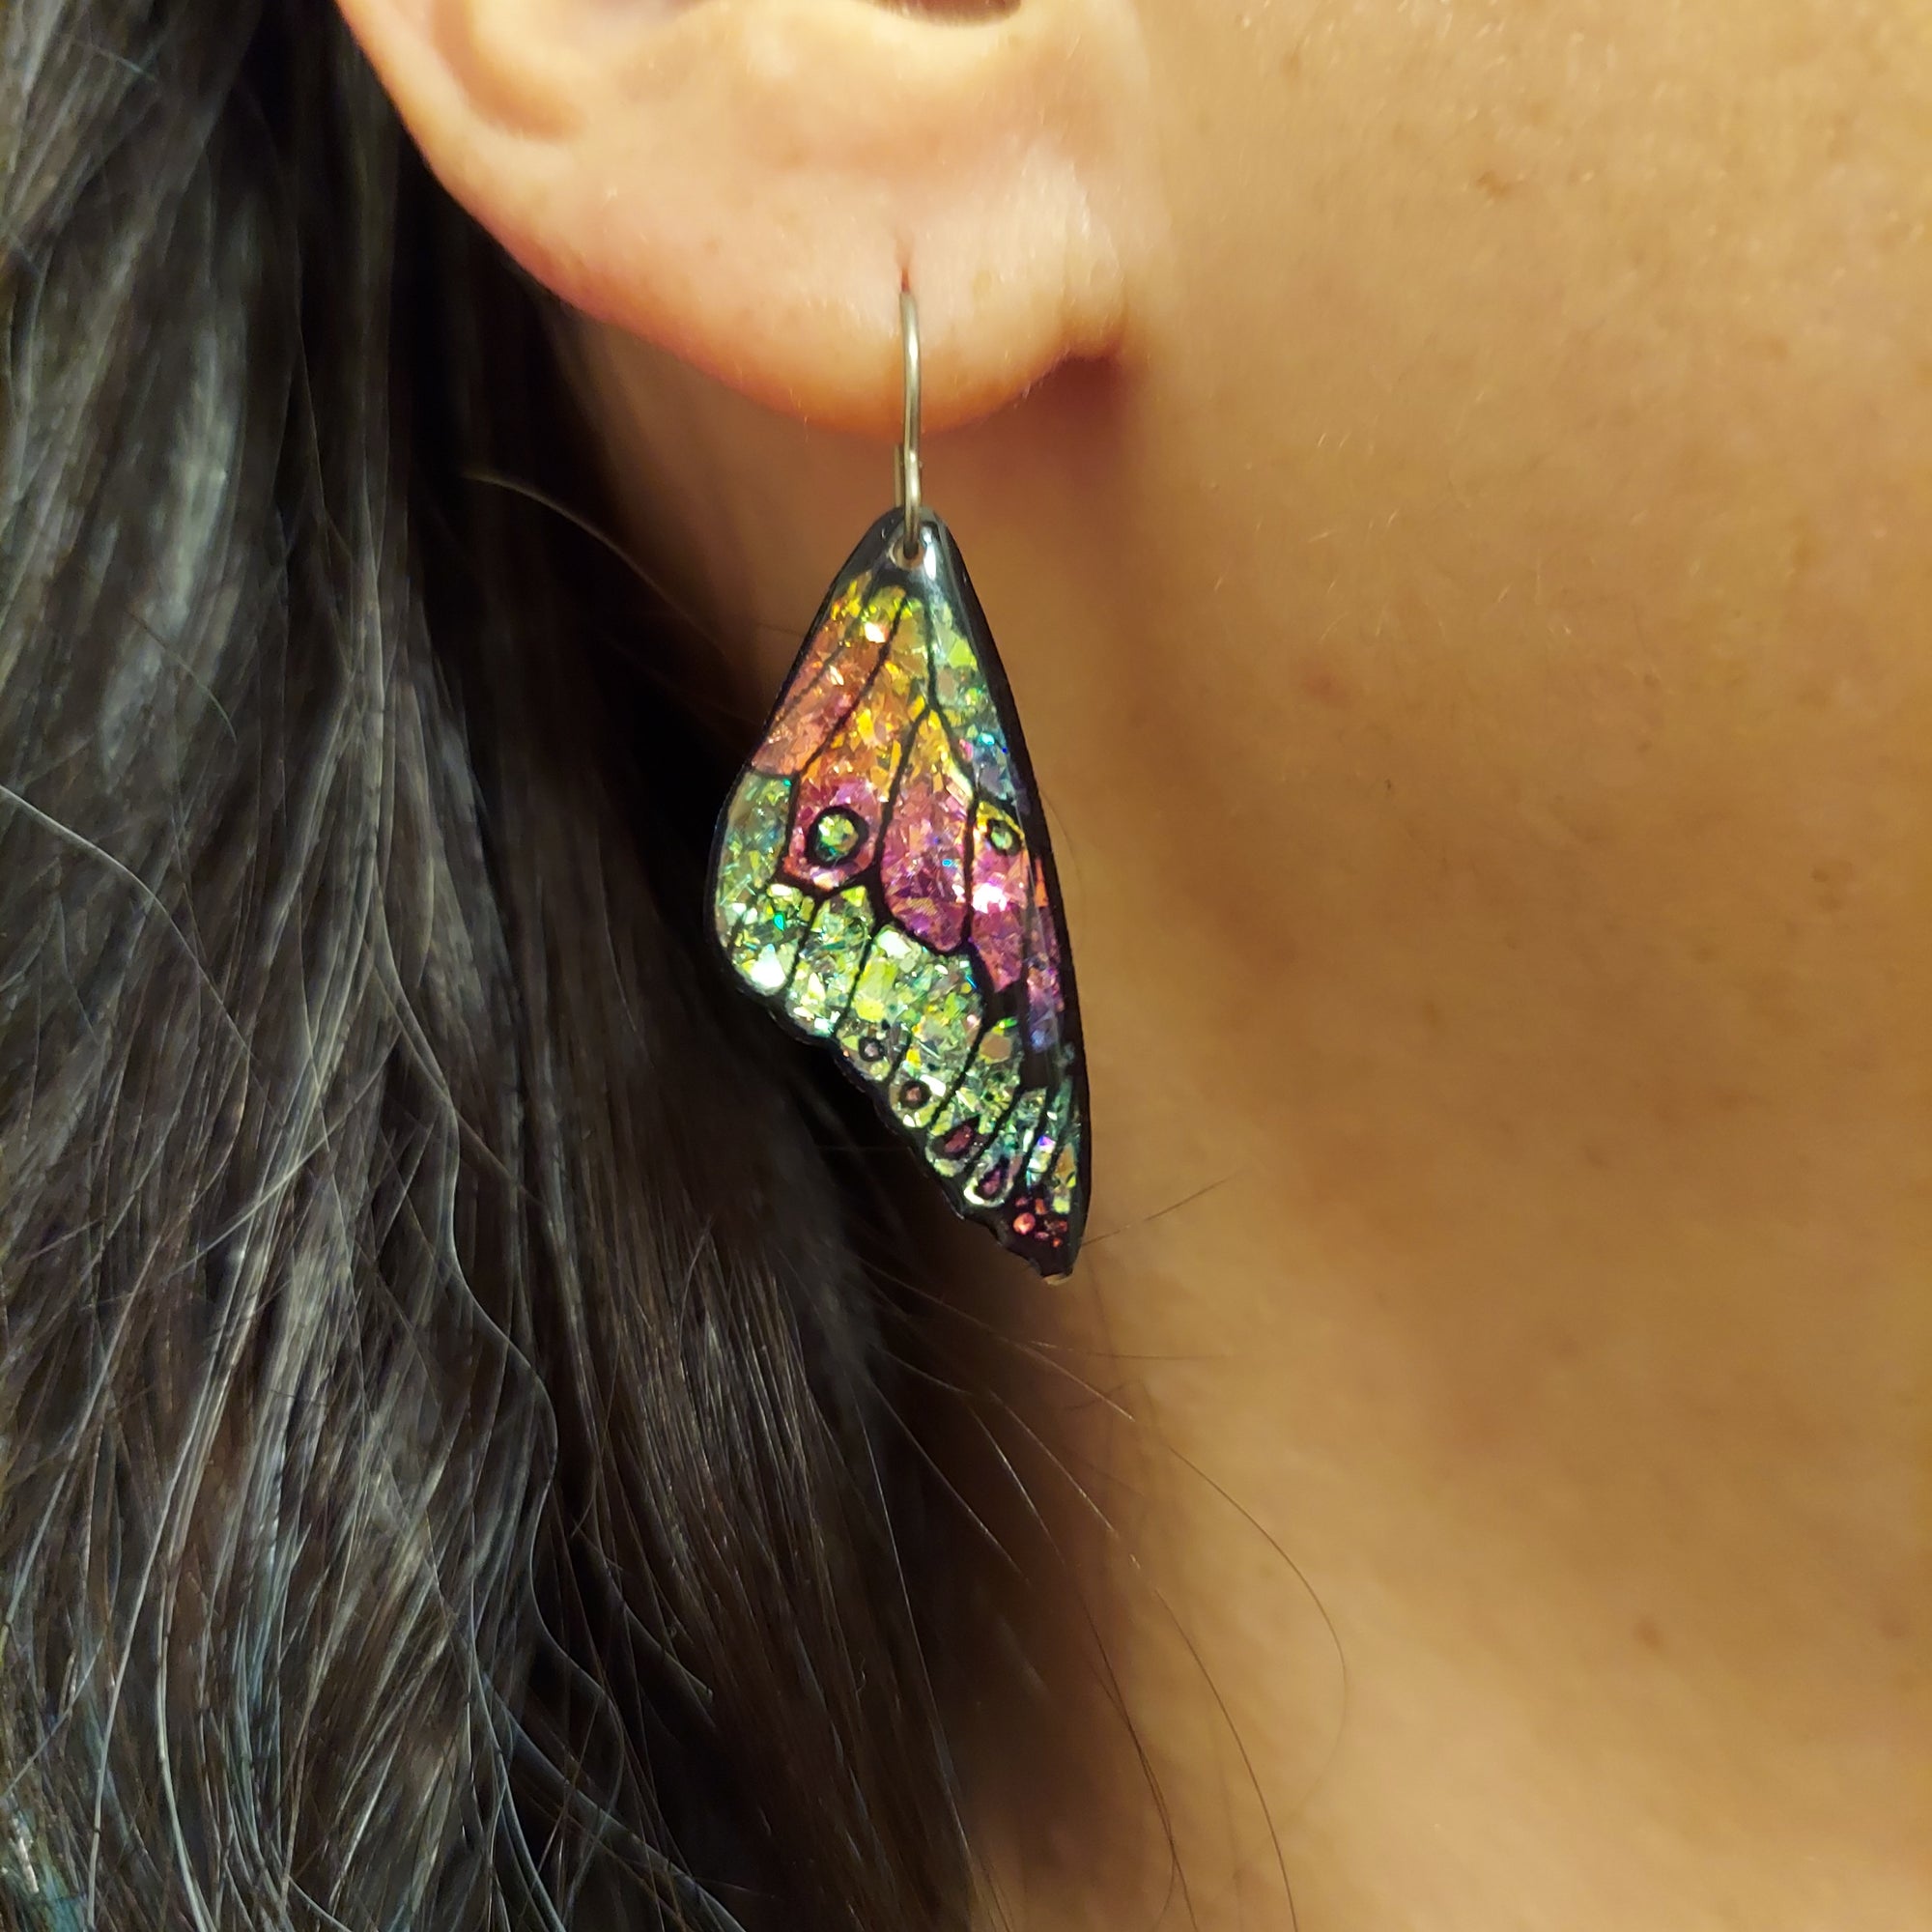 # 23 (2) Small Green-Purple Sparkly Butterfly Wing Earrings